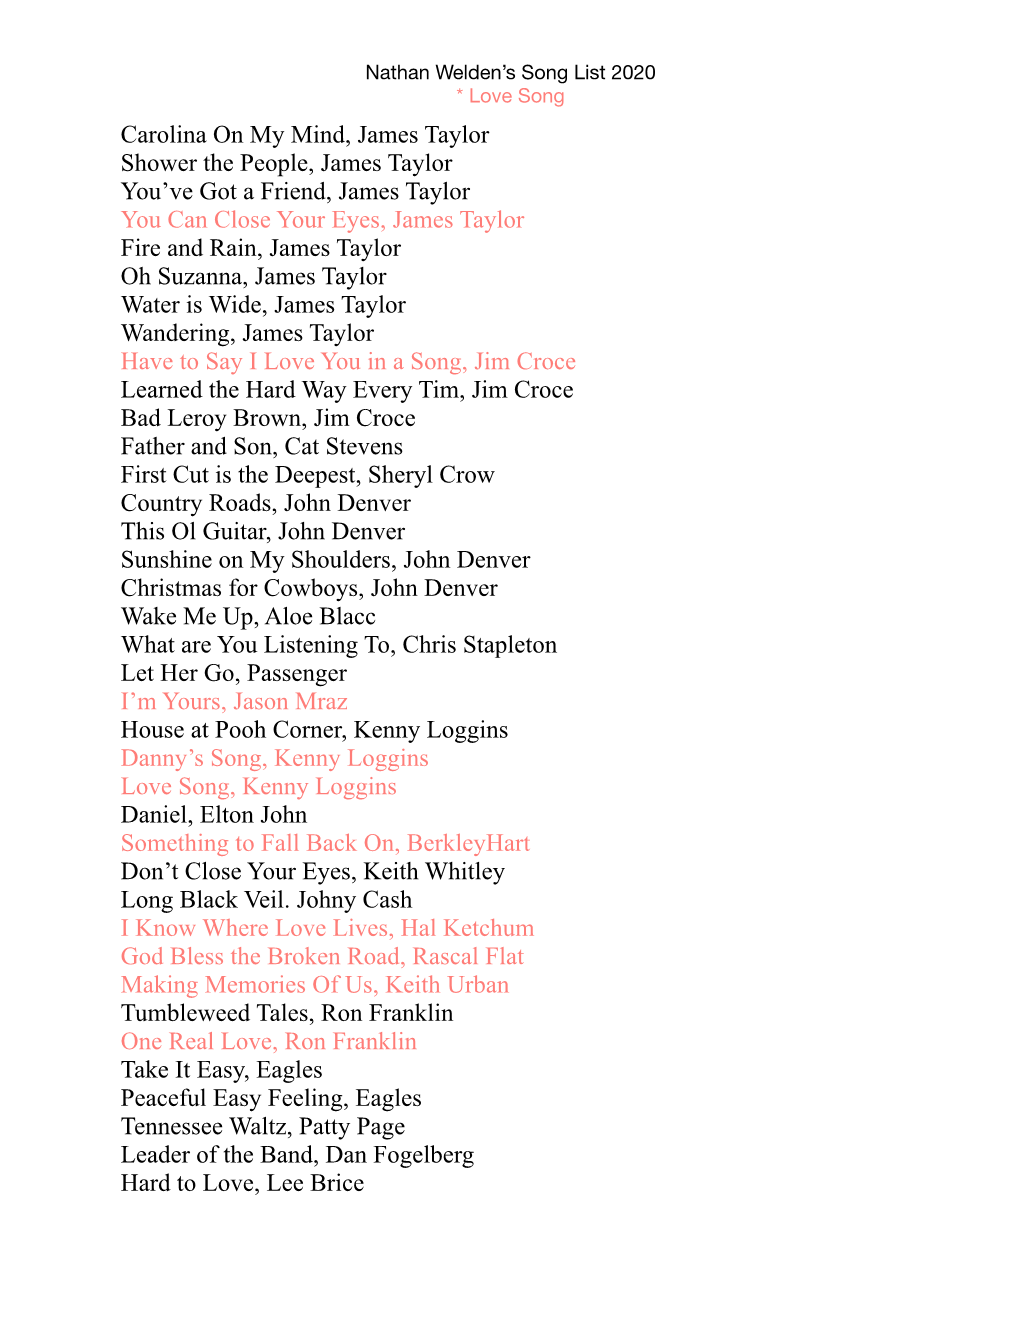 NW's Song List 2020 Updated 11-14